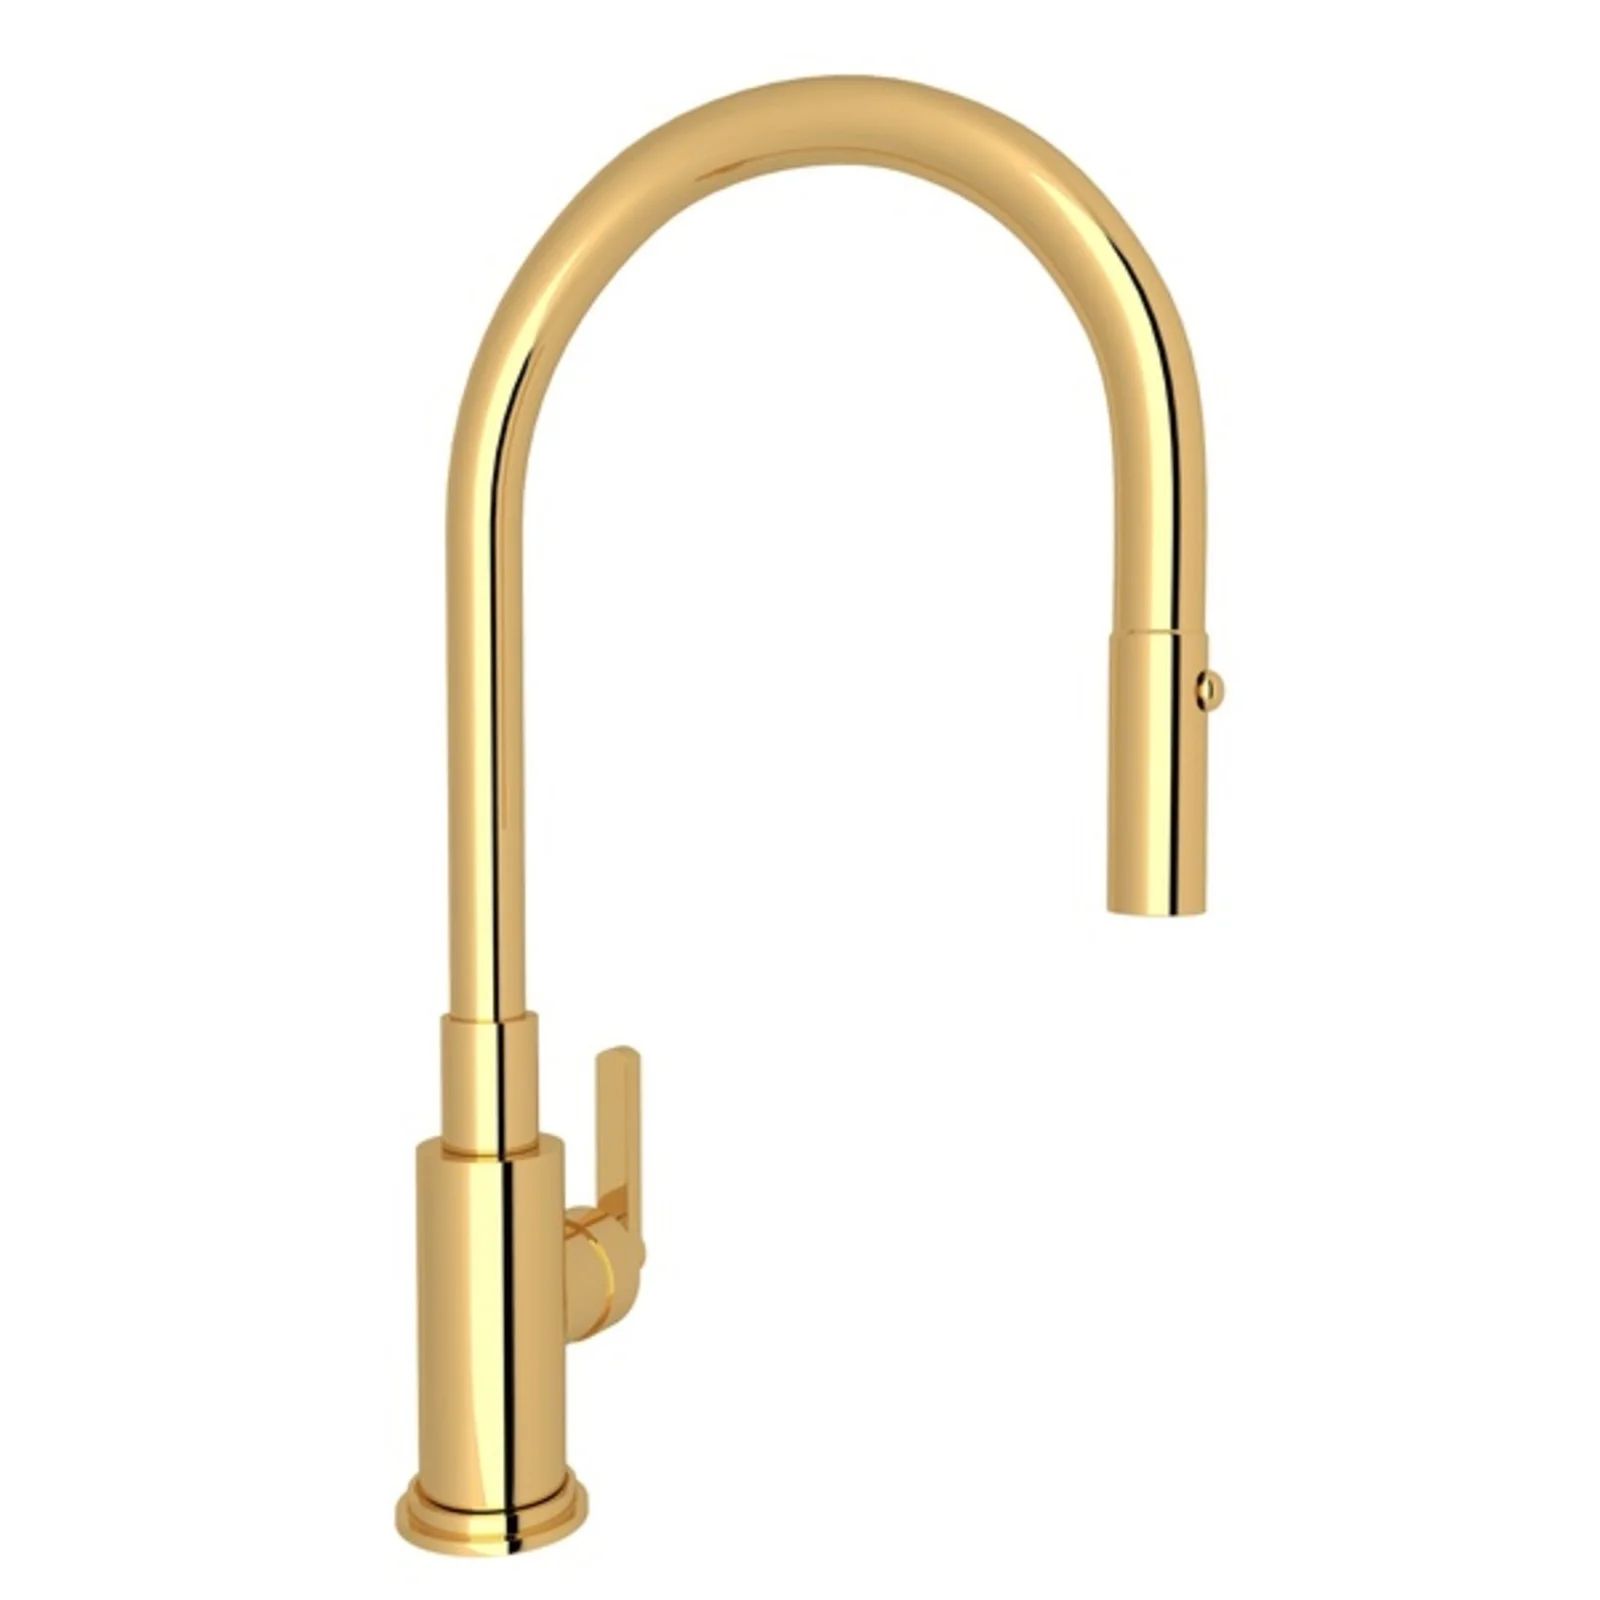 Lombardia Pull Down Single Handle Kitchen Faucet | Wayfair North America